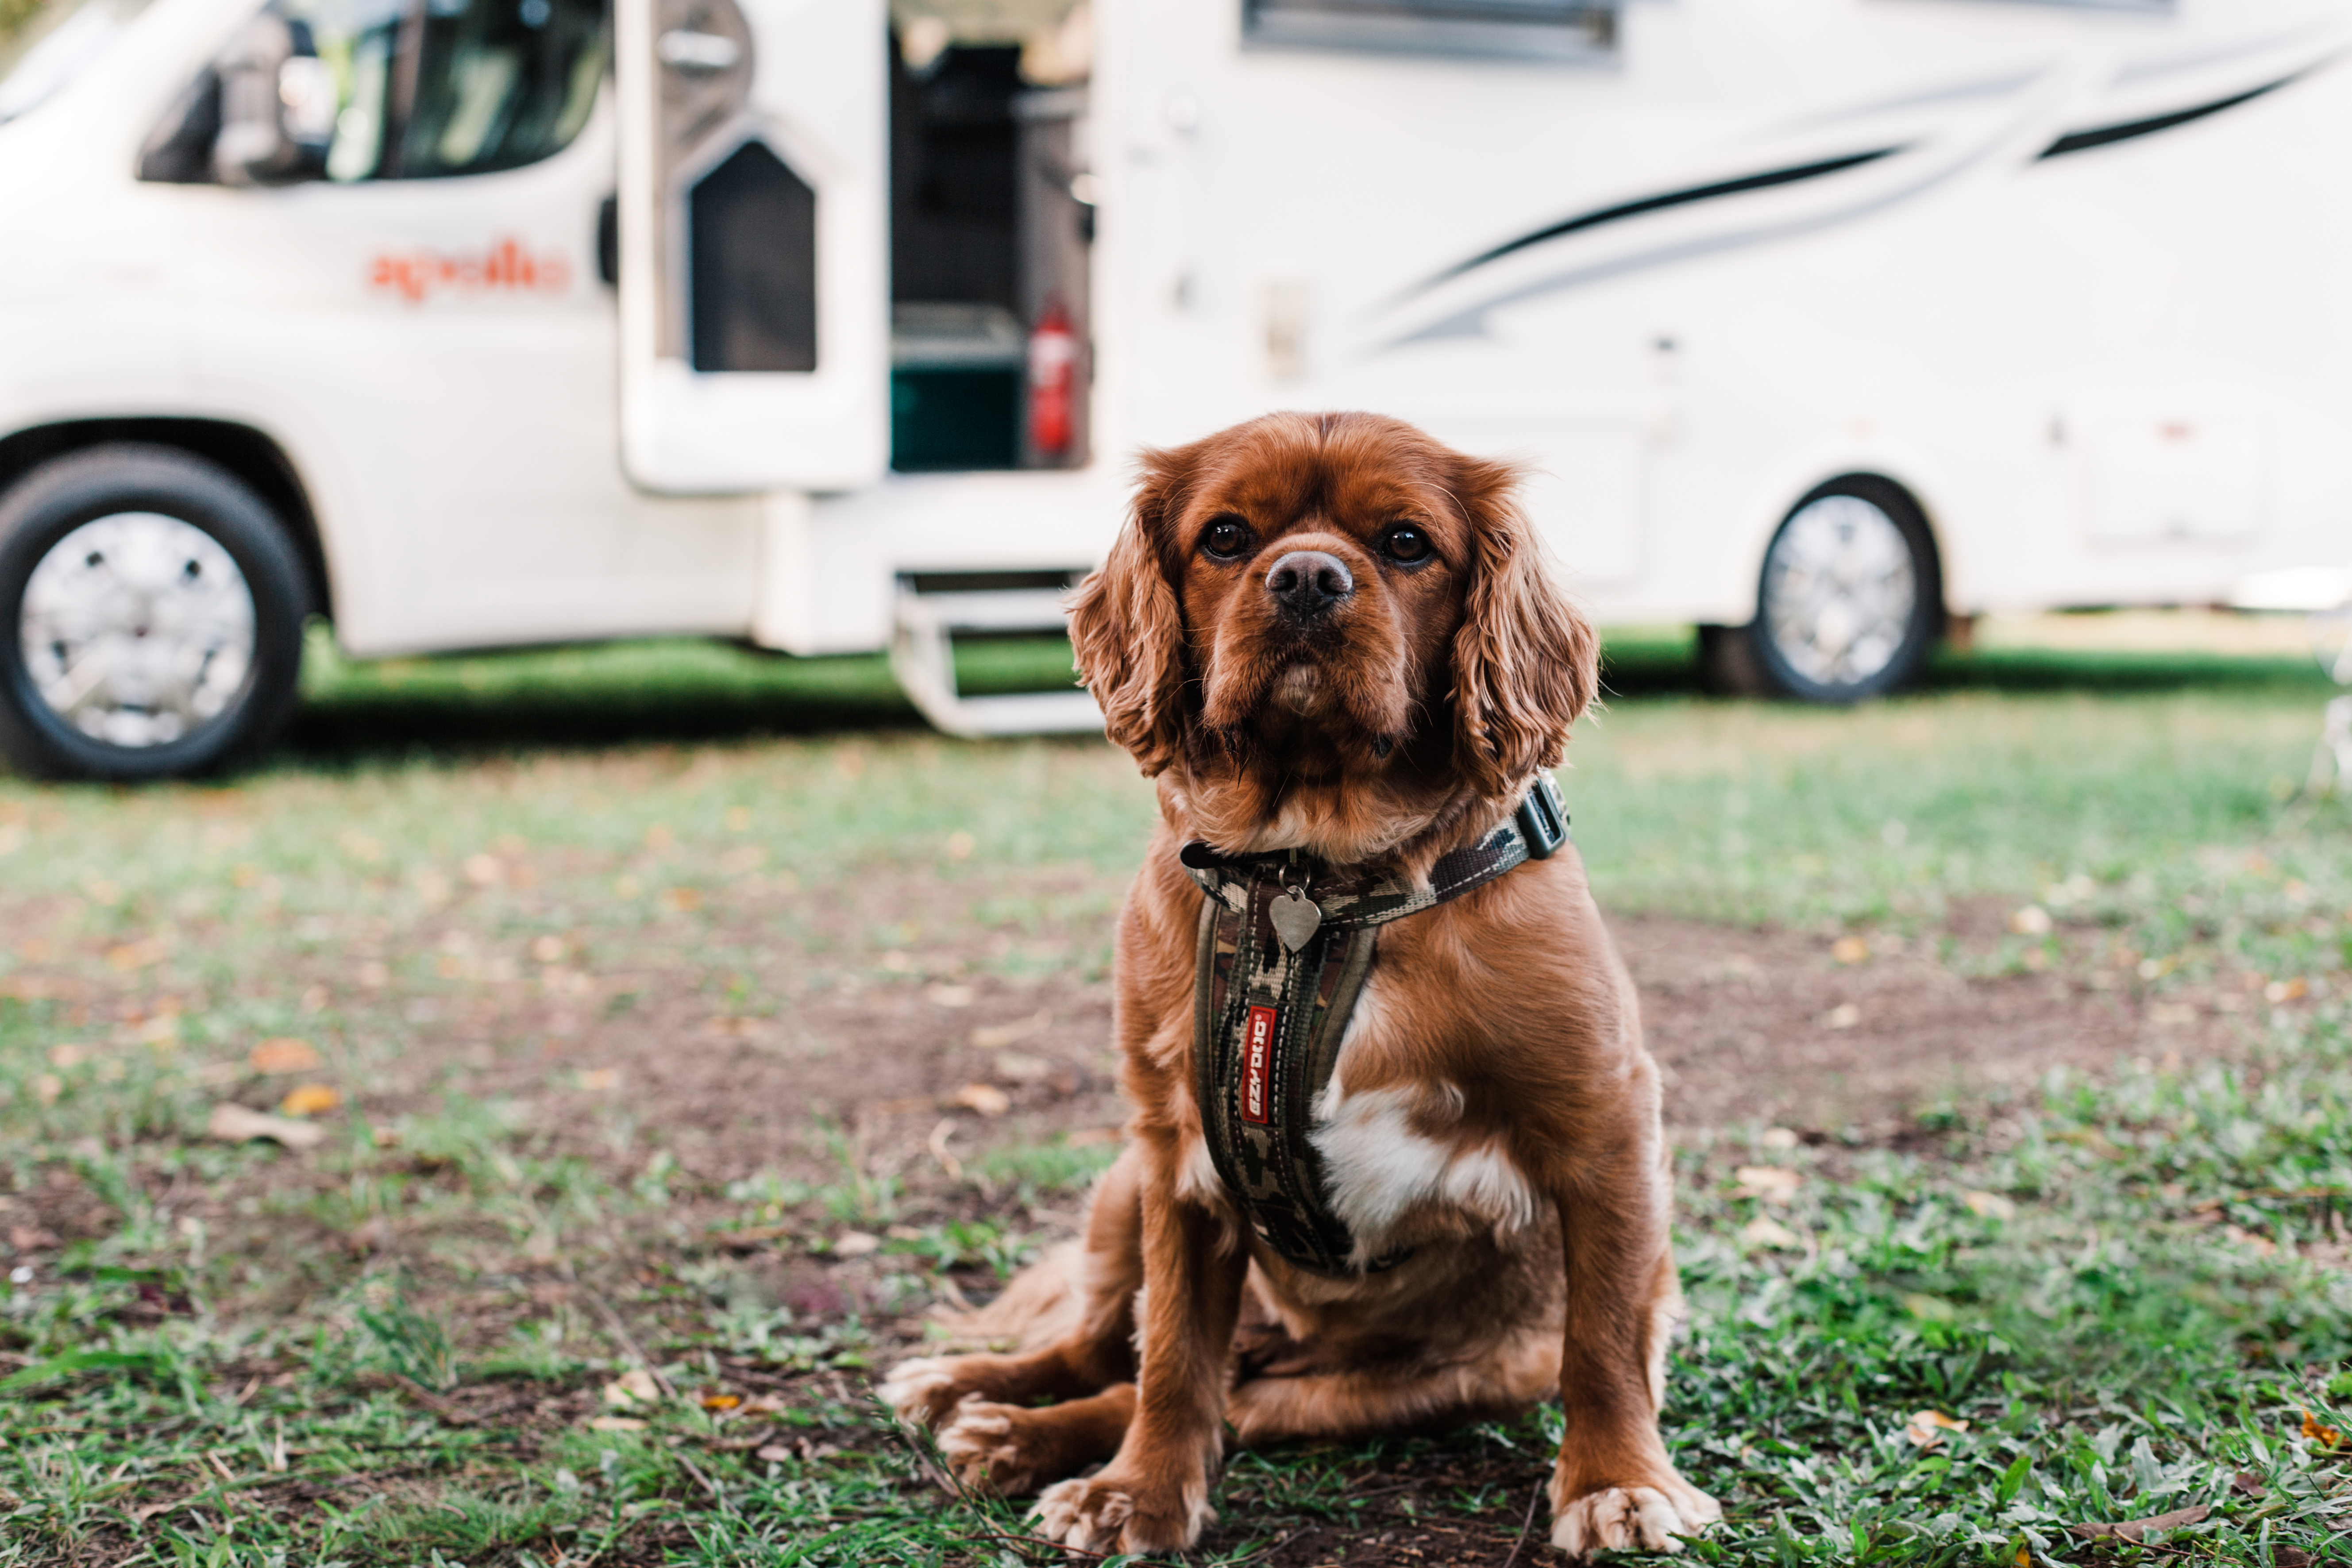 Camper hire with Apollo is pet friendly